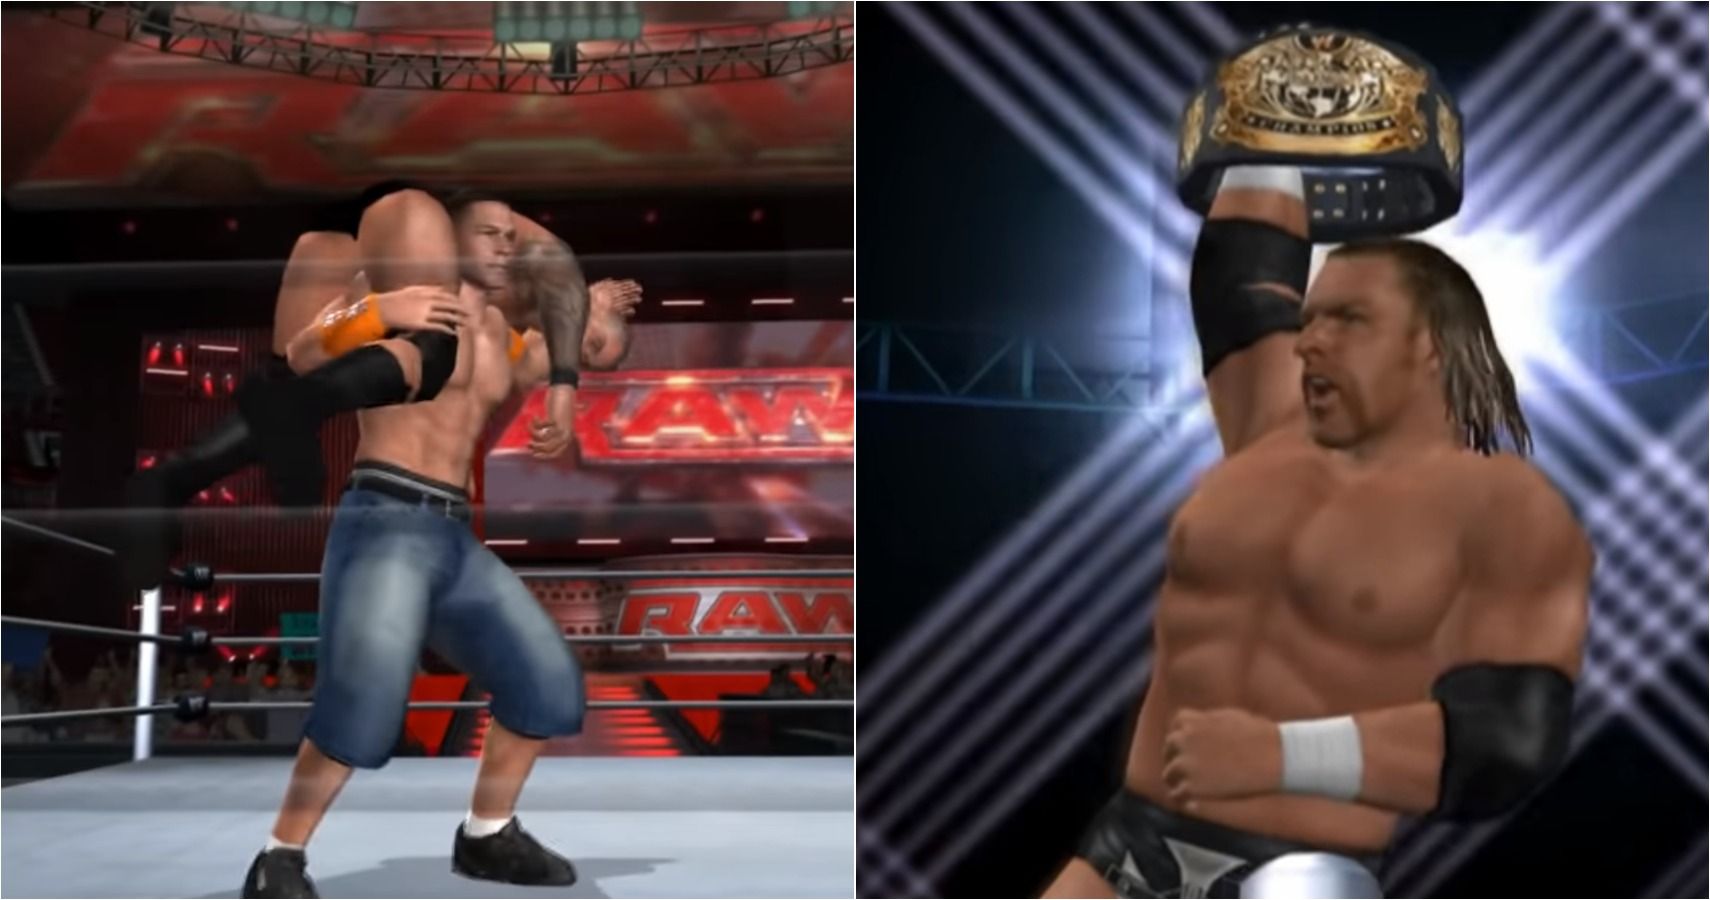 Every Wwe Game On The Ps2 Ranked Thegamer